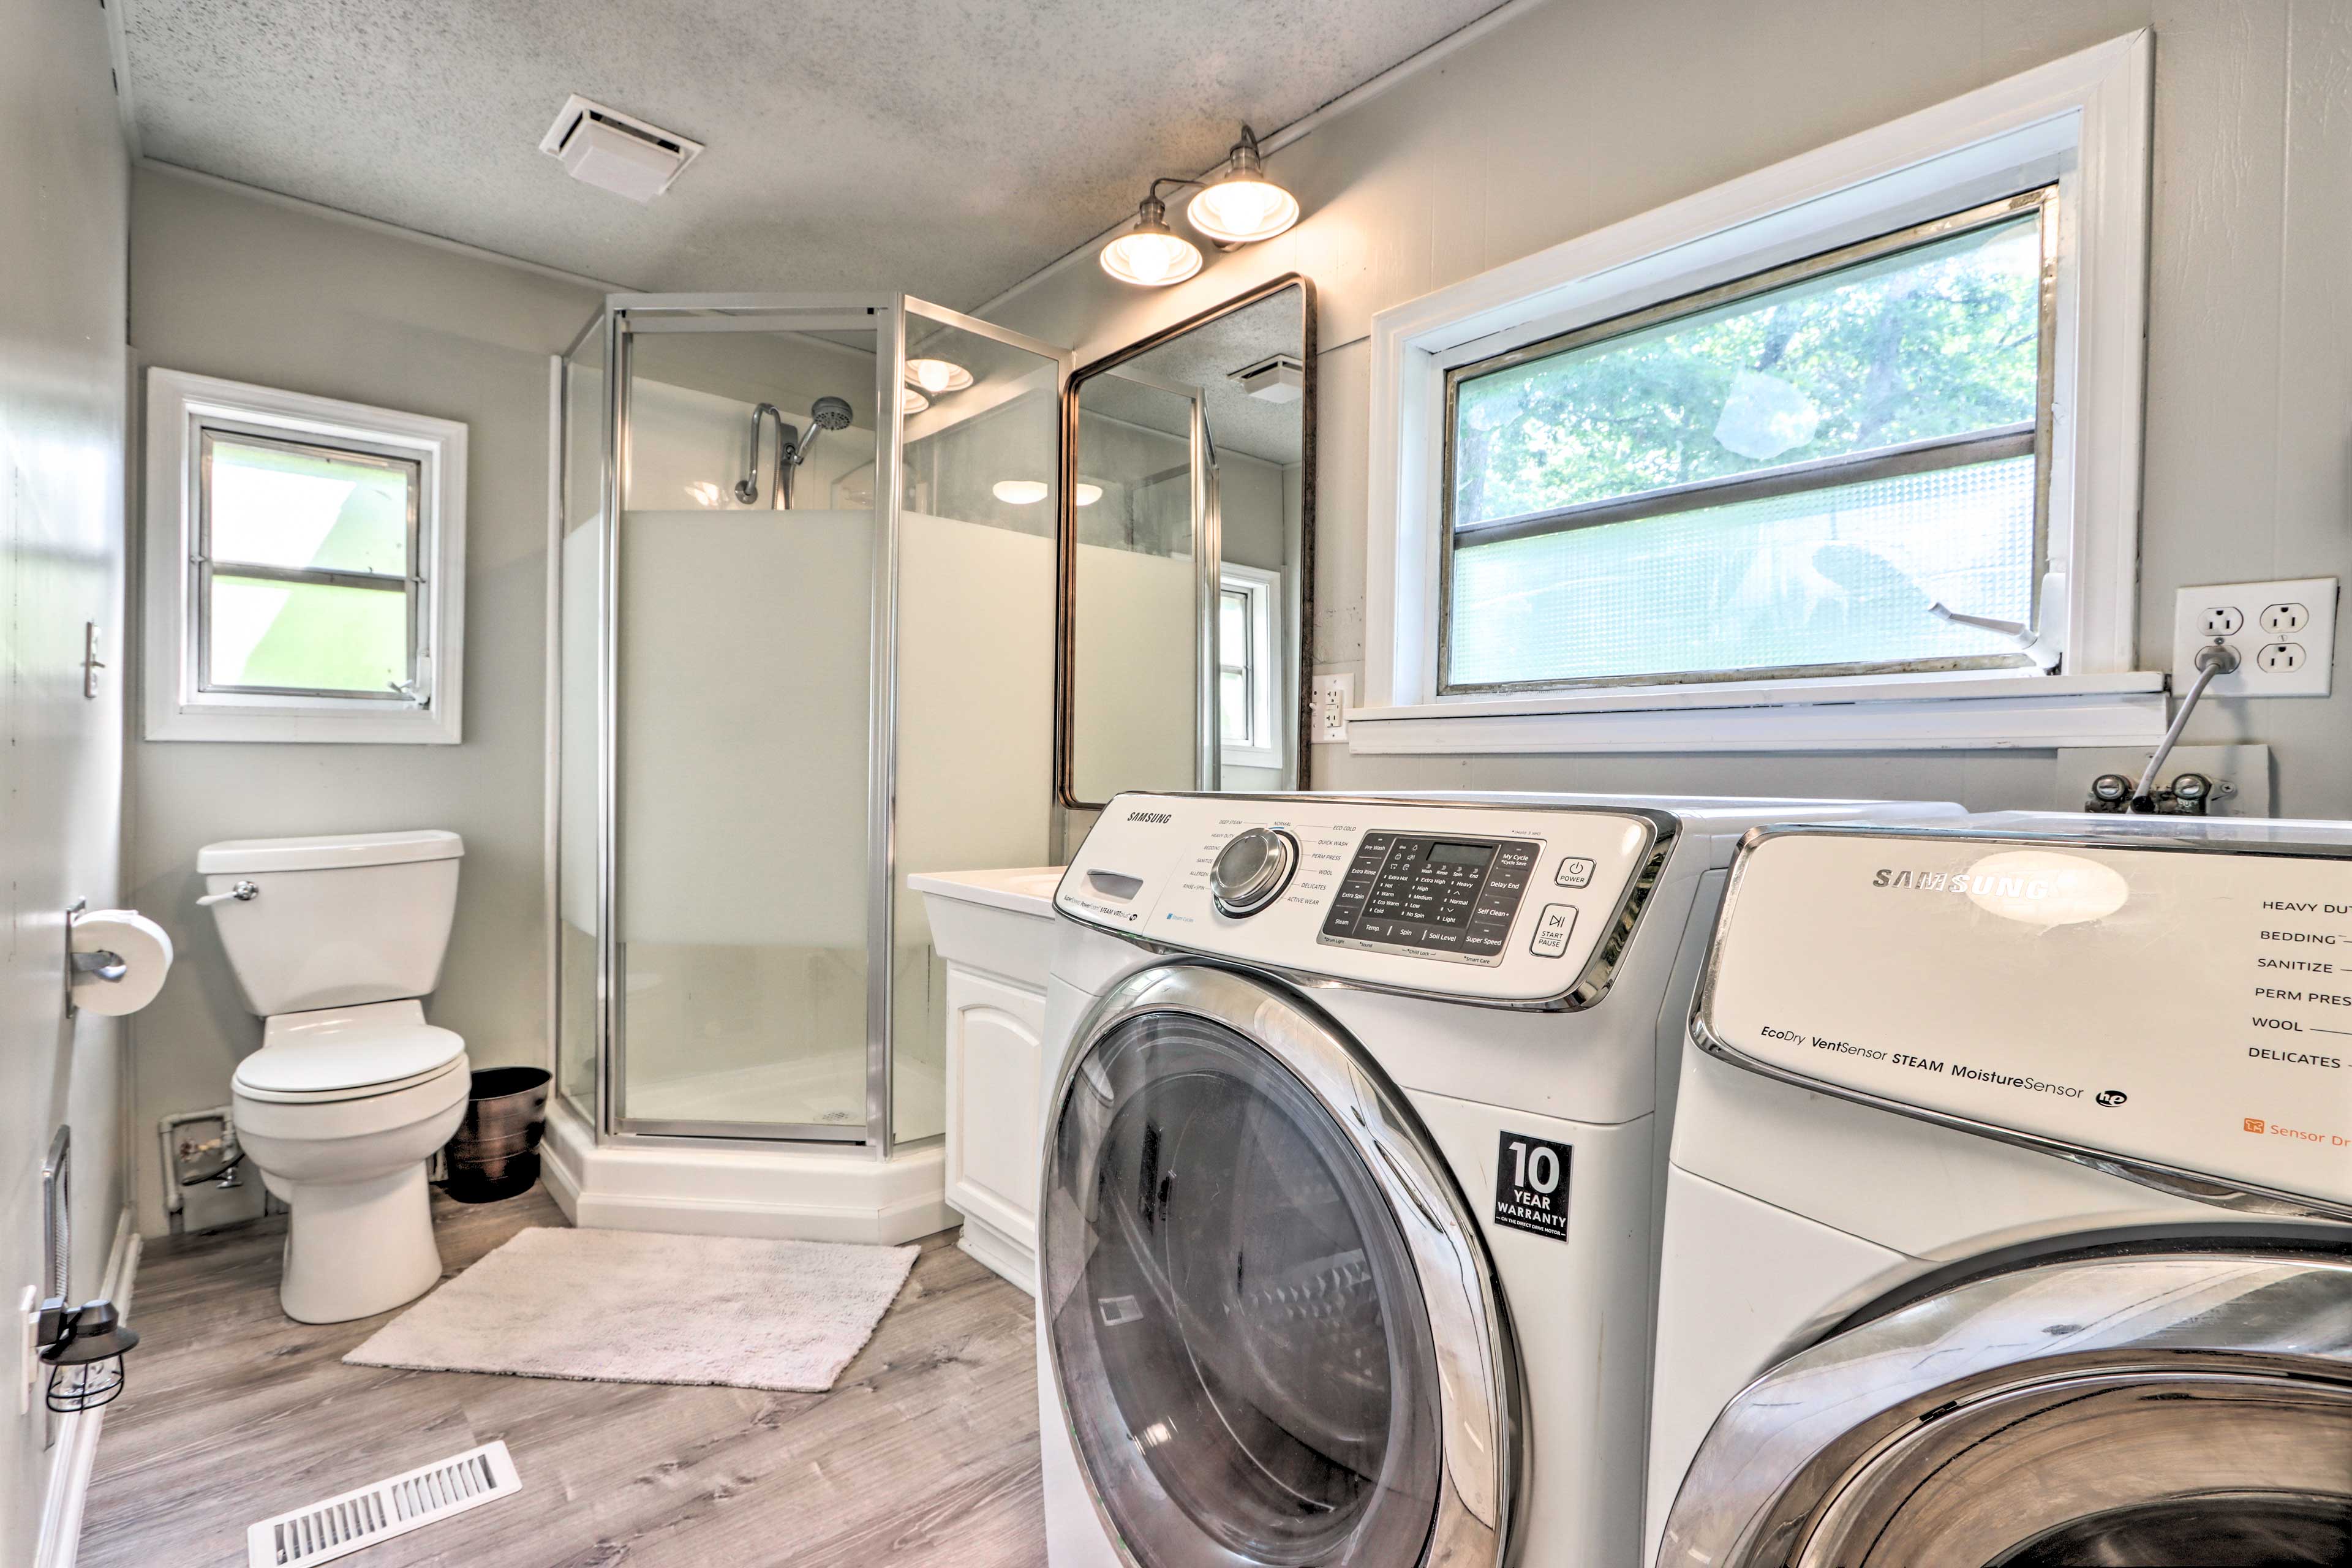 Full Bathroom | Towels Provided | Washer & Dryer | Lower Level